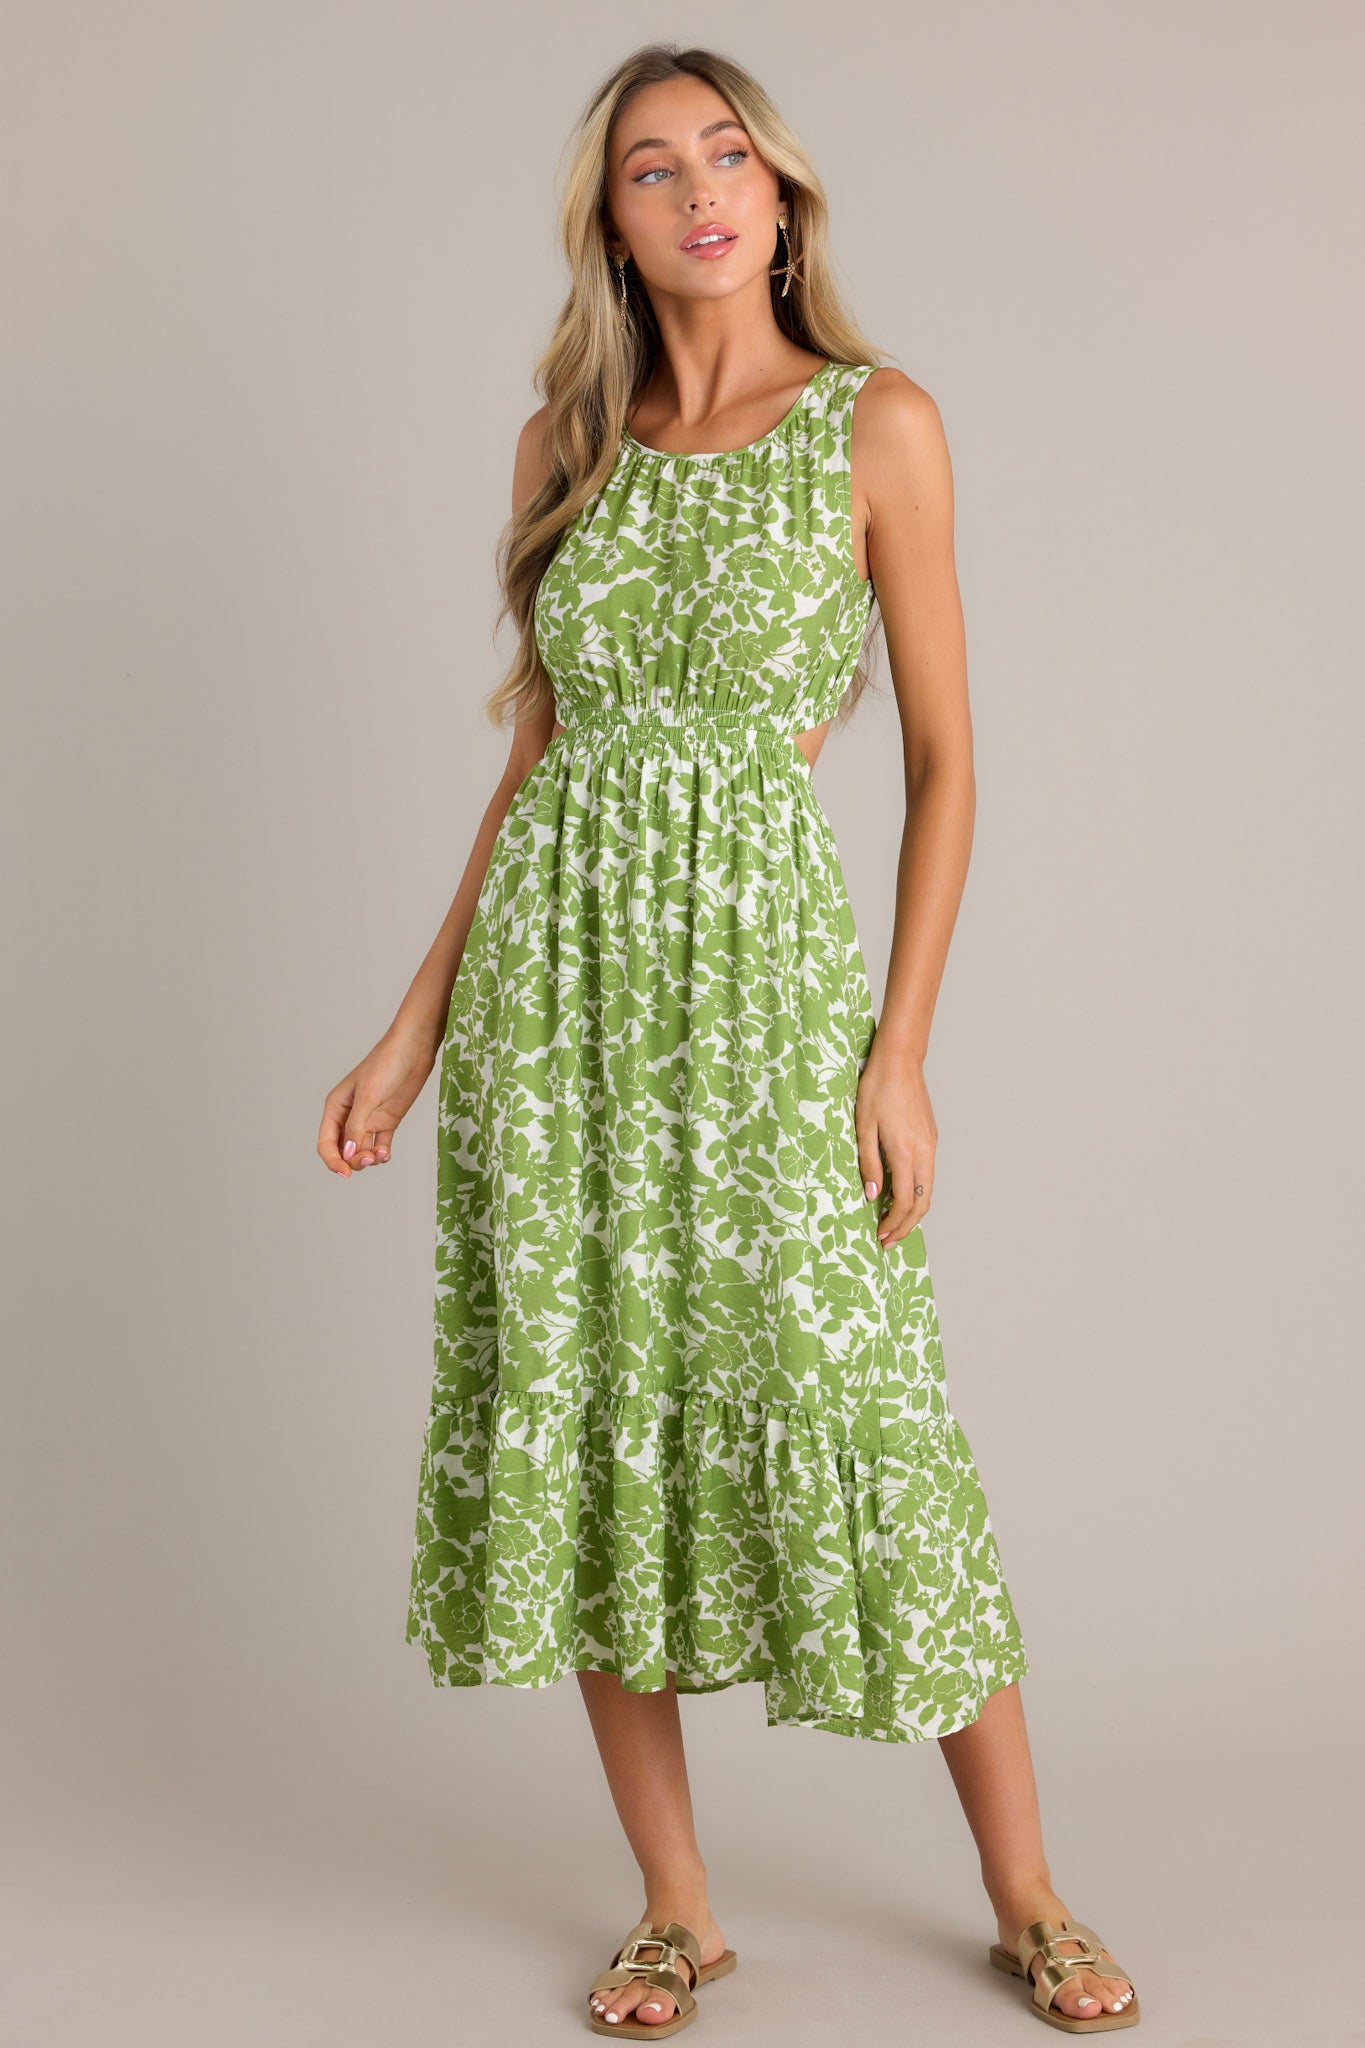 Full length view of a green and white floral print sleeveless dress with side cutouts, a gathered waist, and a tiered skirt, showcasing the elegant design.